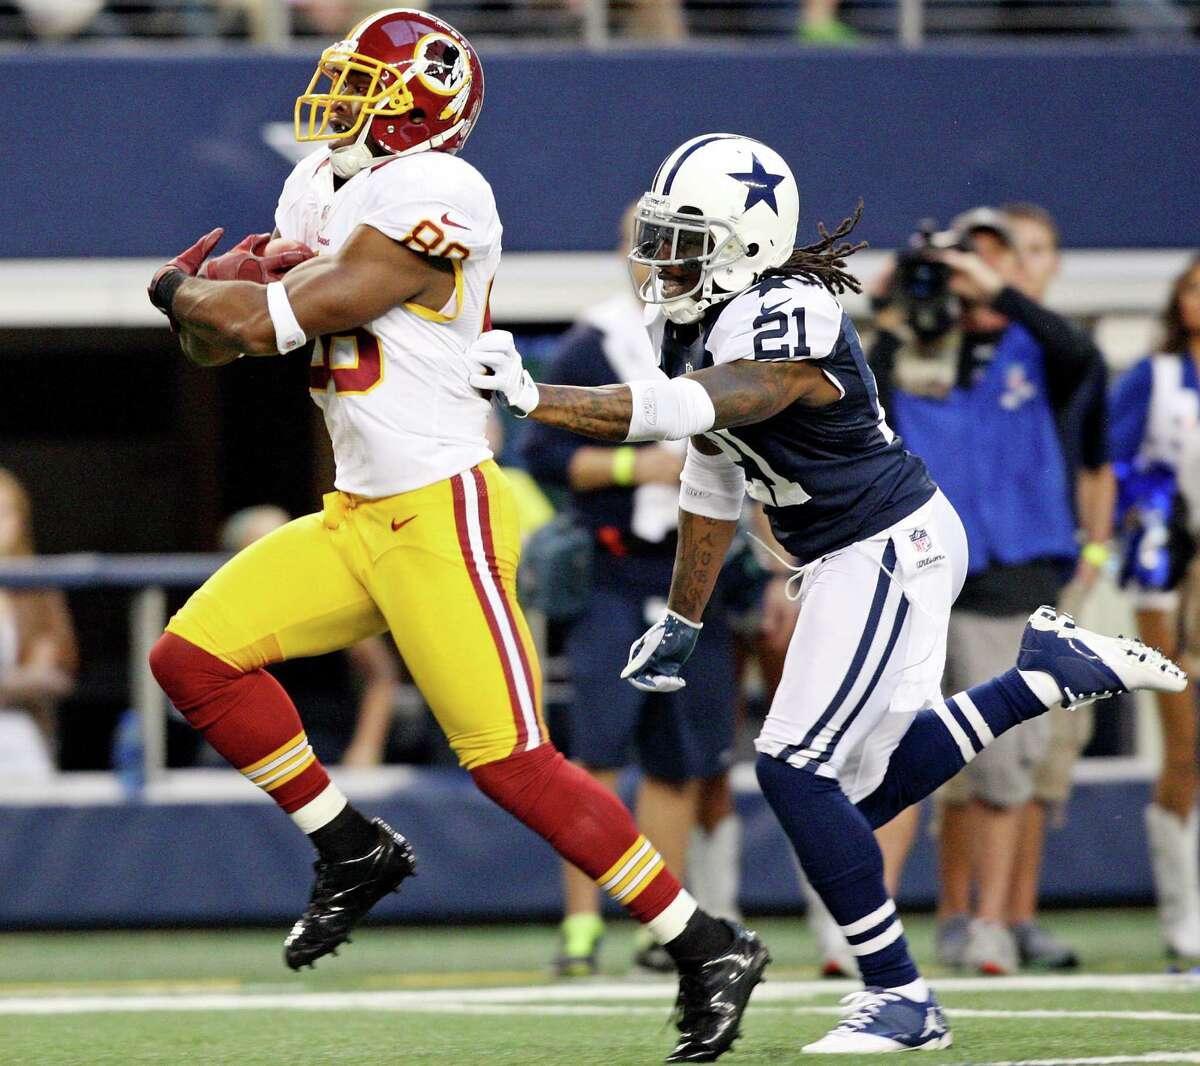 Washington Redskins' Pierre Gar�on heads to the end zone for a touchdown ahead of Dallas Cowboys' Mike Jenkins during first half action Thursday Nov. 22, 2012 at Cowboys Stadium in Arlington, Tx.